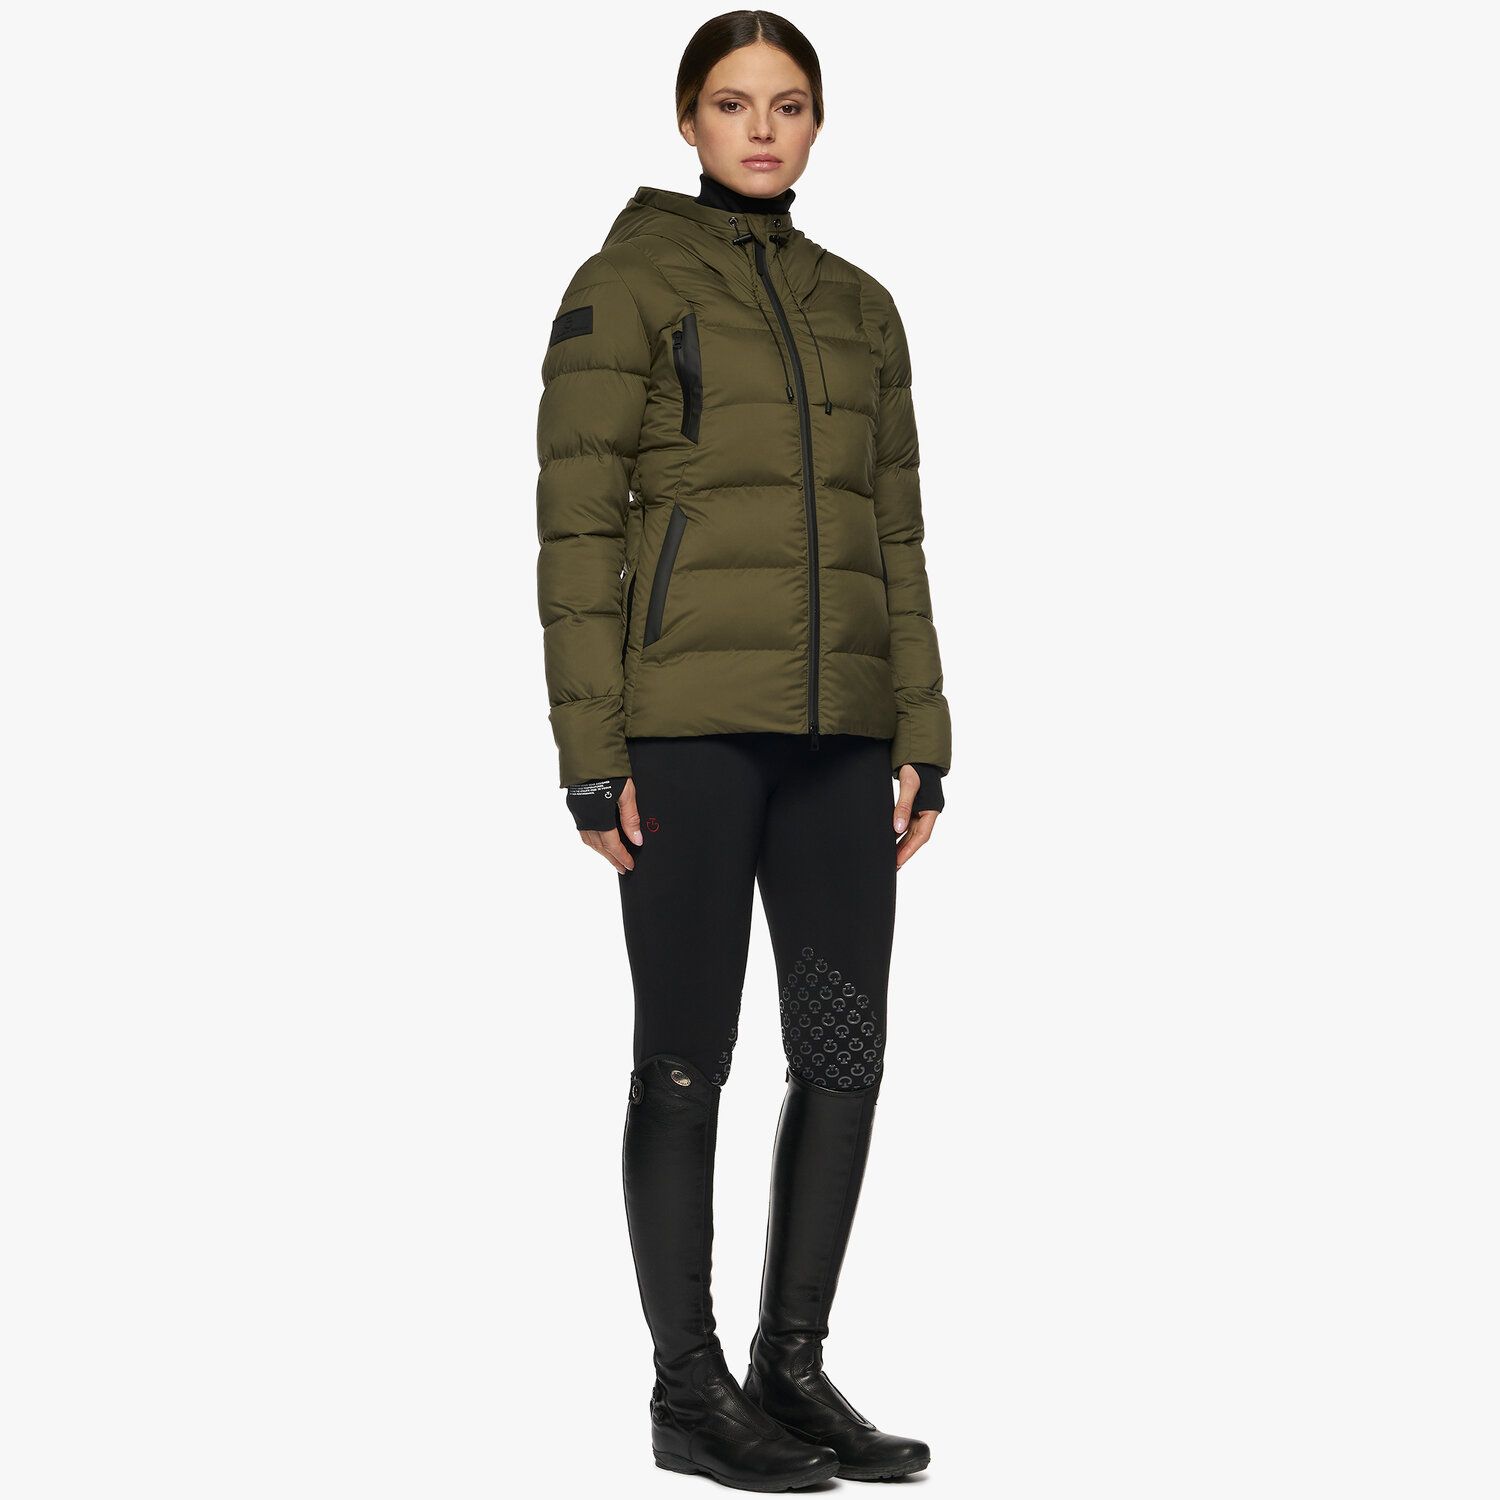 Cavalleria Toscana Women’s quilted nylon puffer jacket FOLIAGE GREEN-1